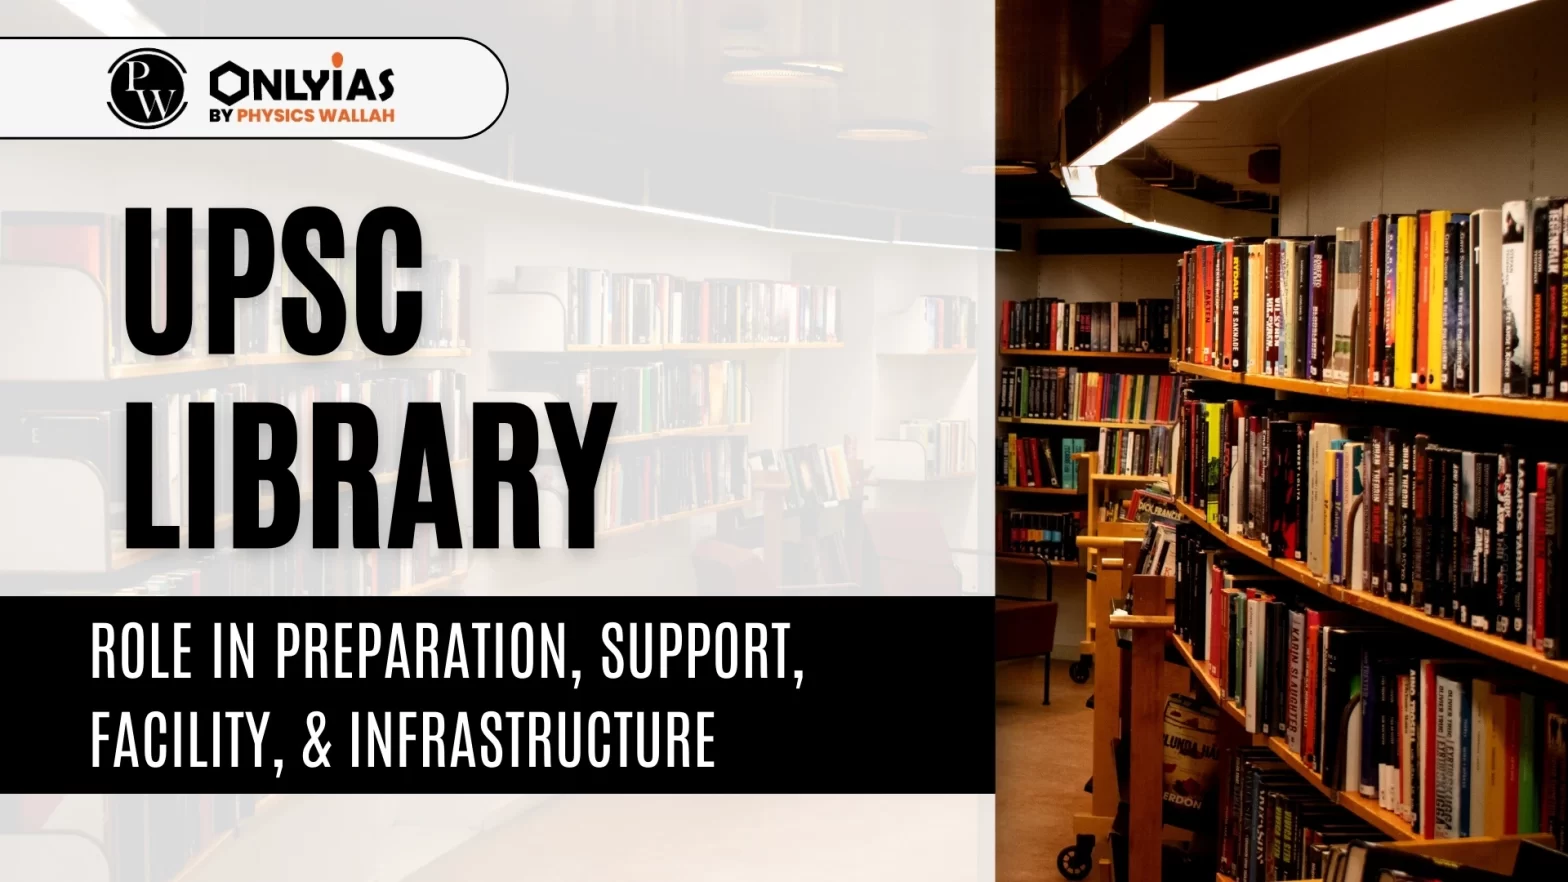 UPSC Library: Role in Preparation, Support, Facility, & Infrastructure